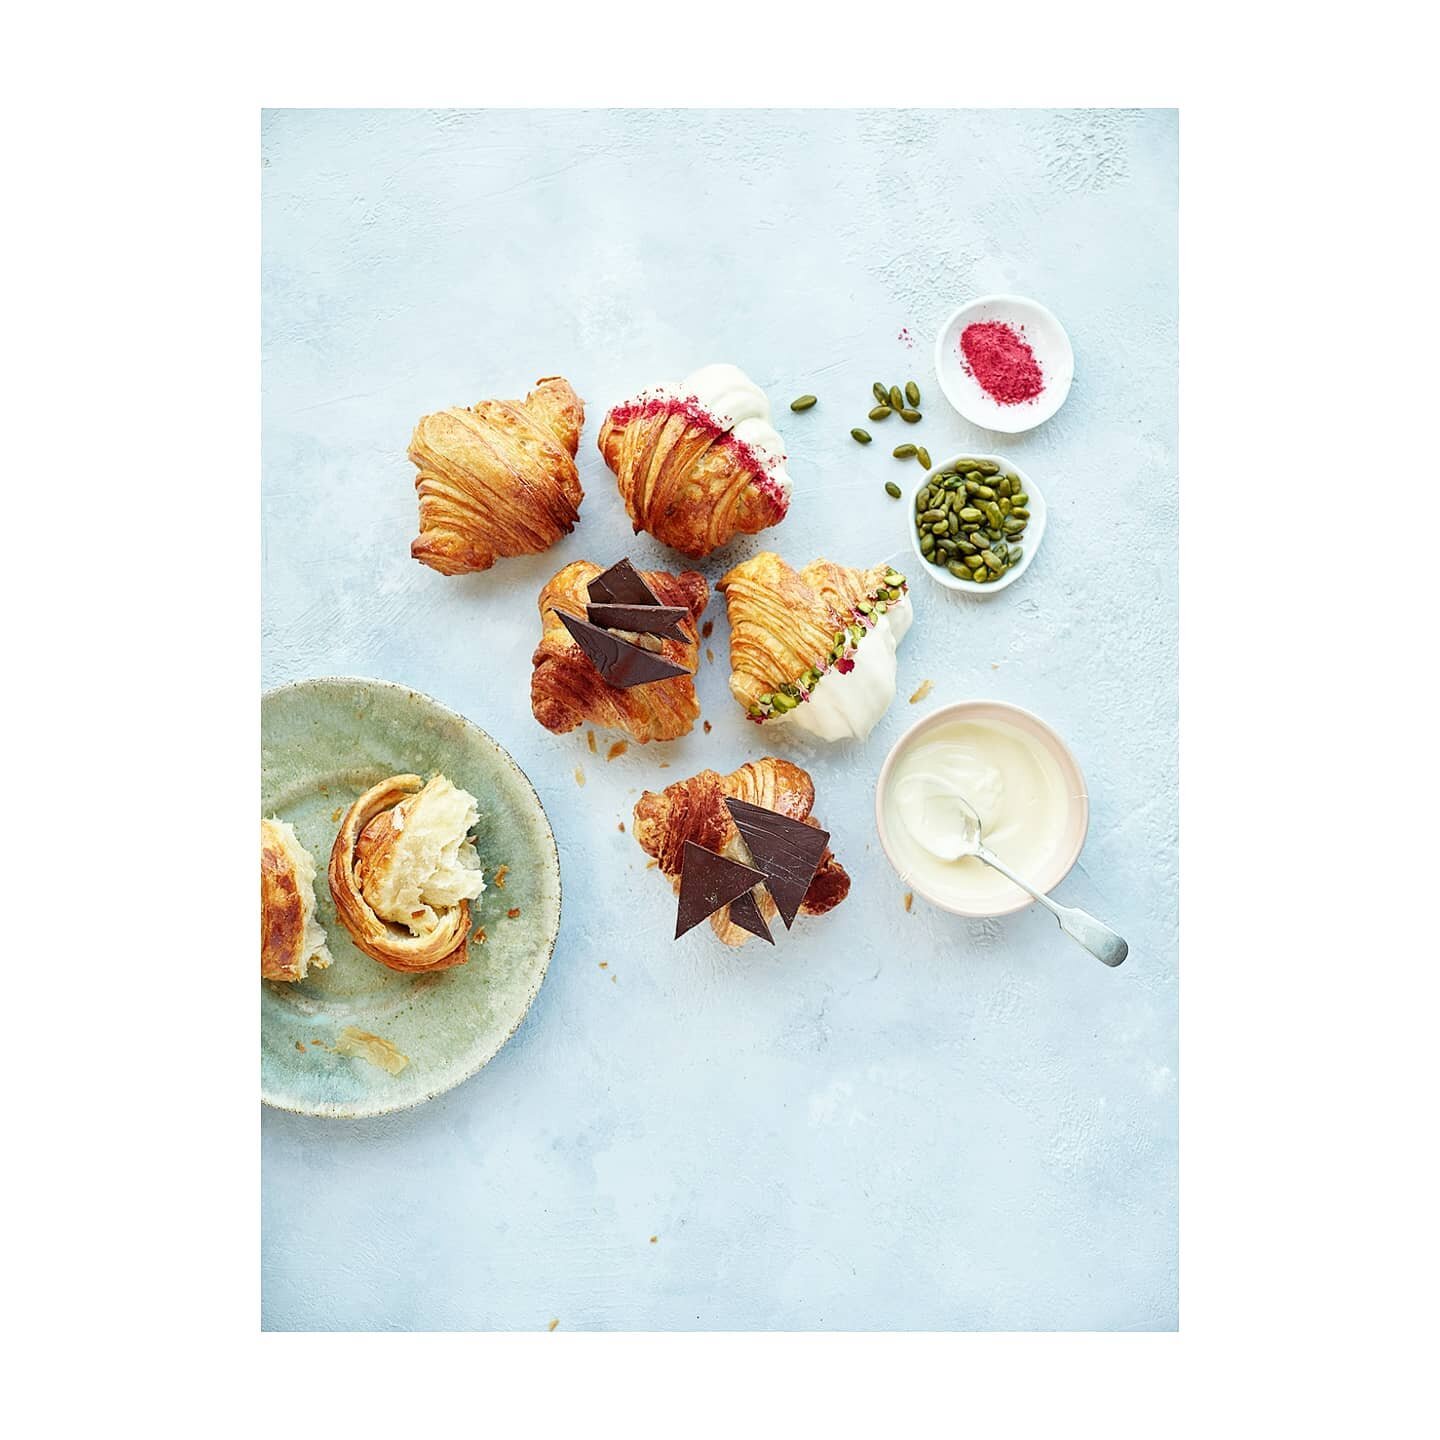 Absolutely delighted to have contributed to the new @foodandwineireland which is out today with the Sunday Business Post. Pictured here some beautiful creations by the massively talented @medialuna.croissanterie in collaboration with @cloud_picker ca